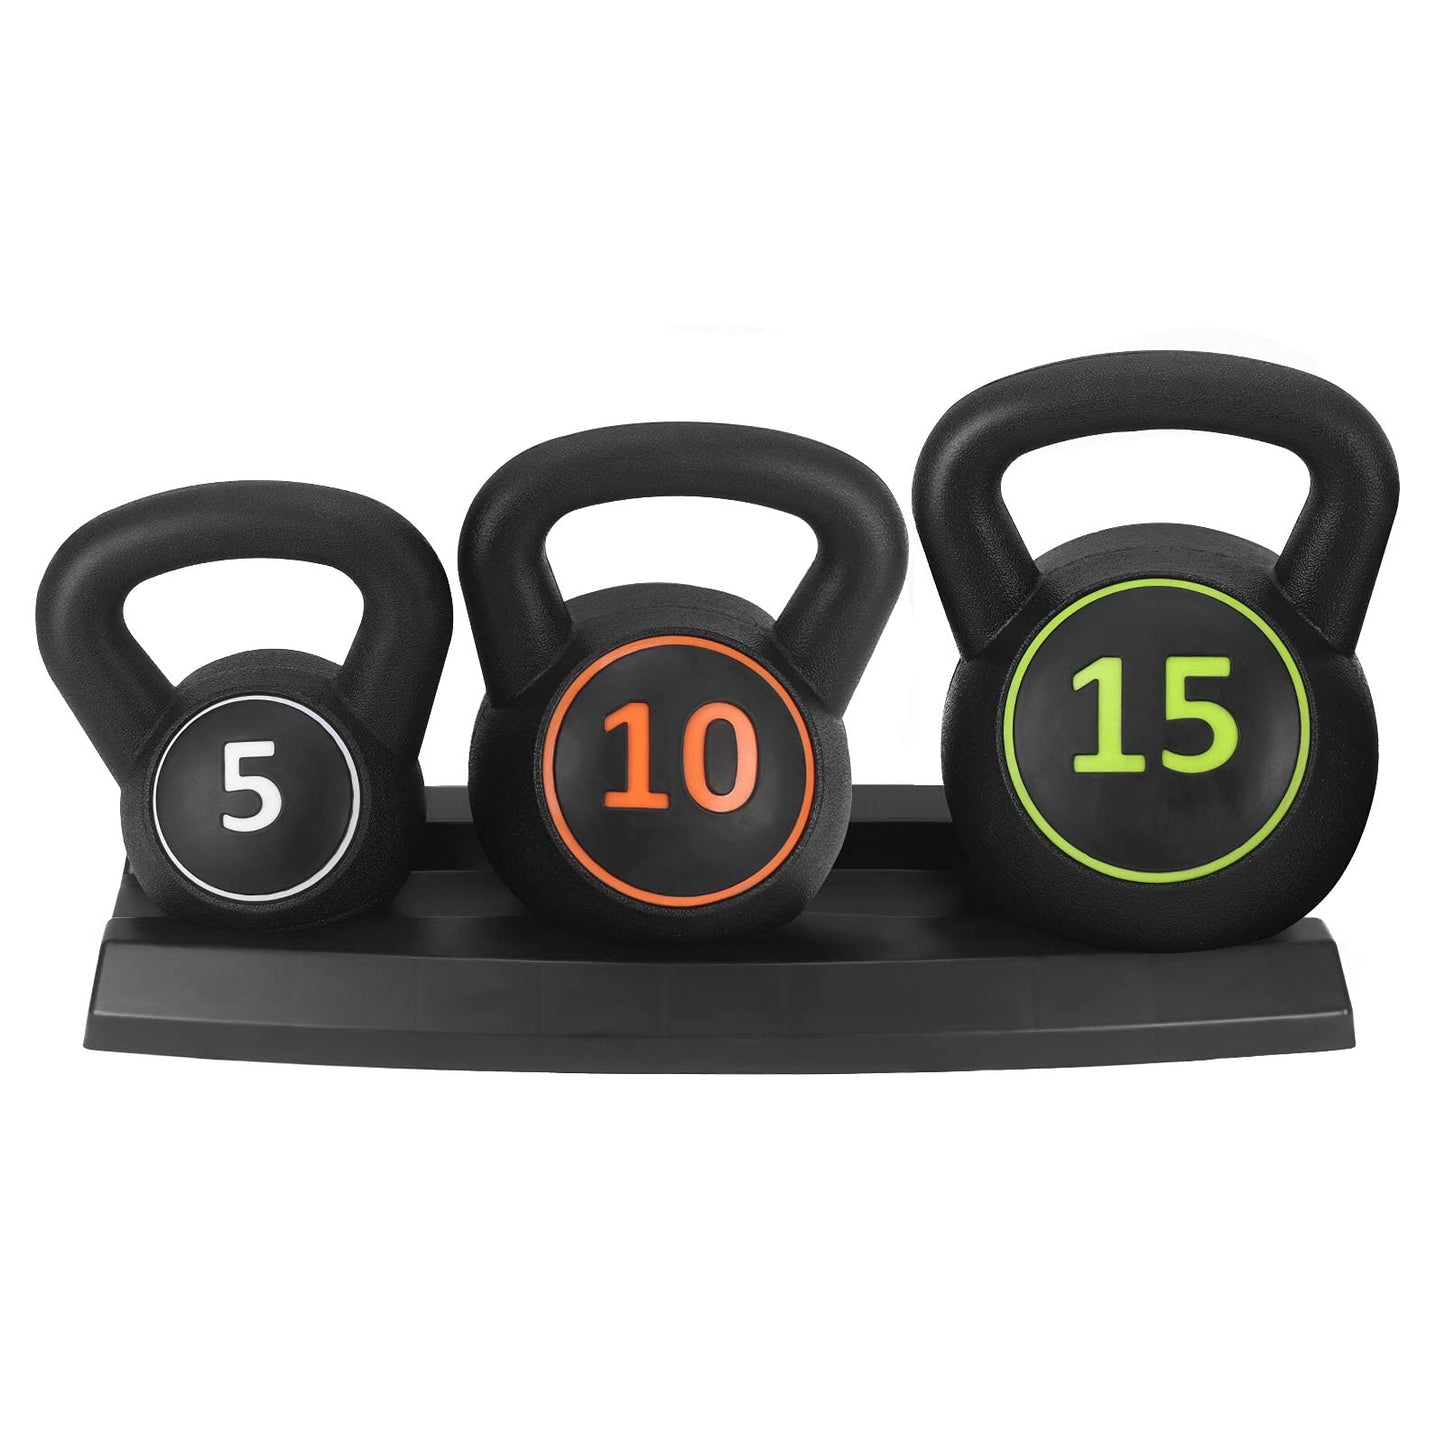 Trintion 3 Pcs Kettlebell Set 5lb 10lb 15lb Weight Lifting Training Kettle Bell Cardio Strength Exercise Equipment for Home Gym Workout Bodybuilding